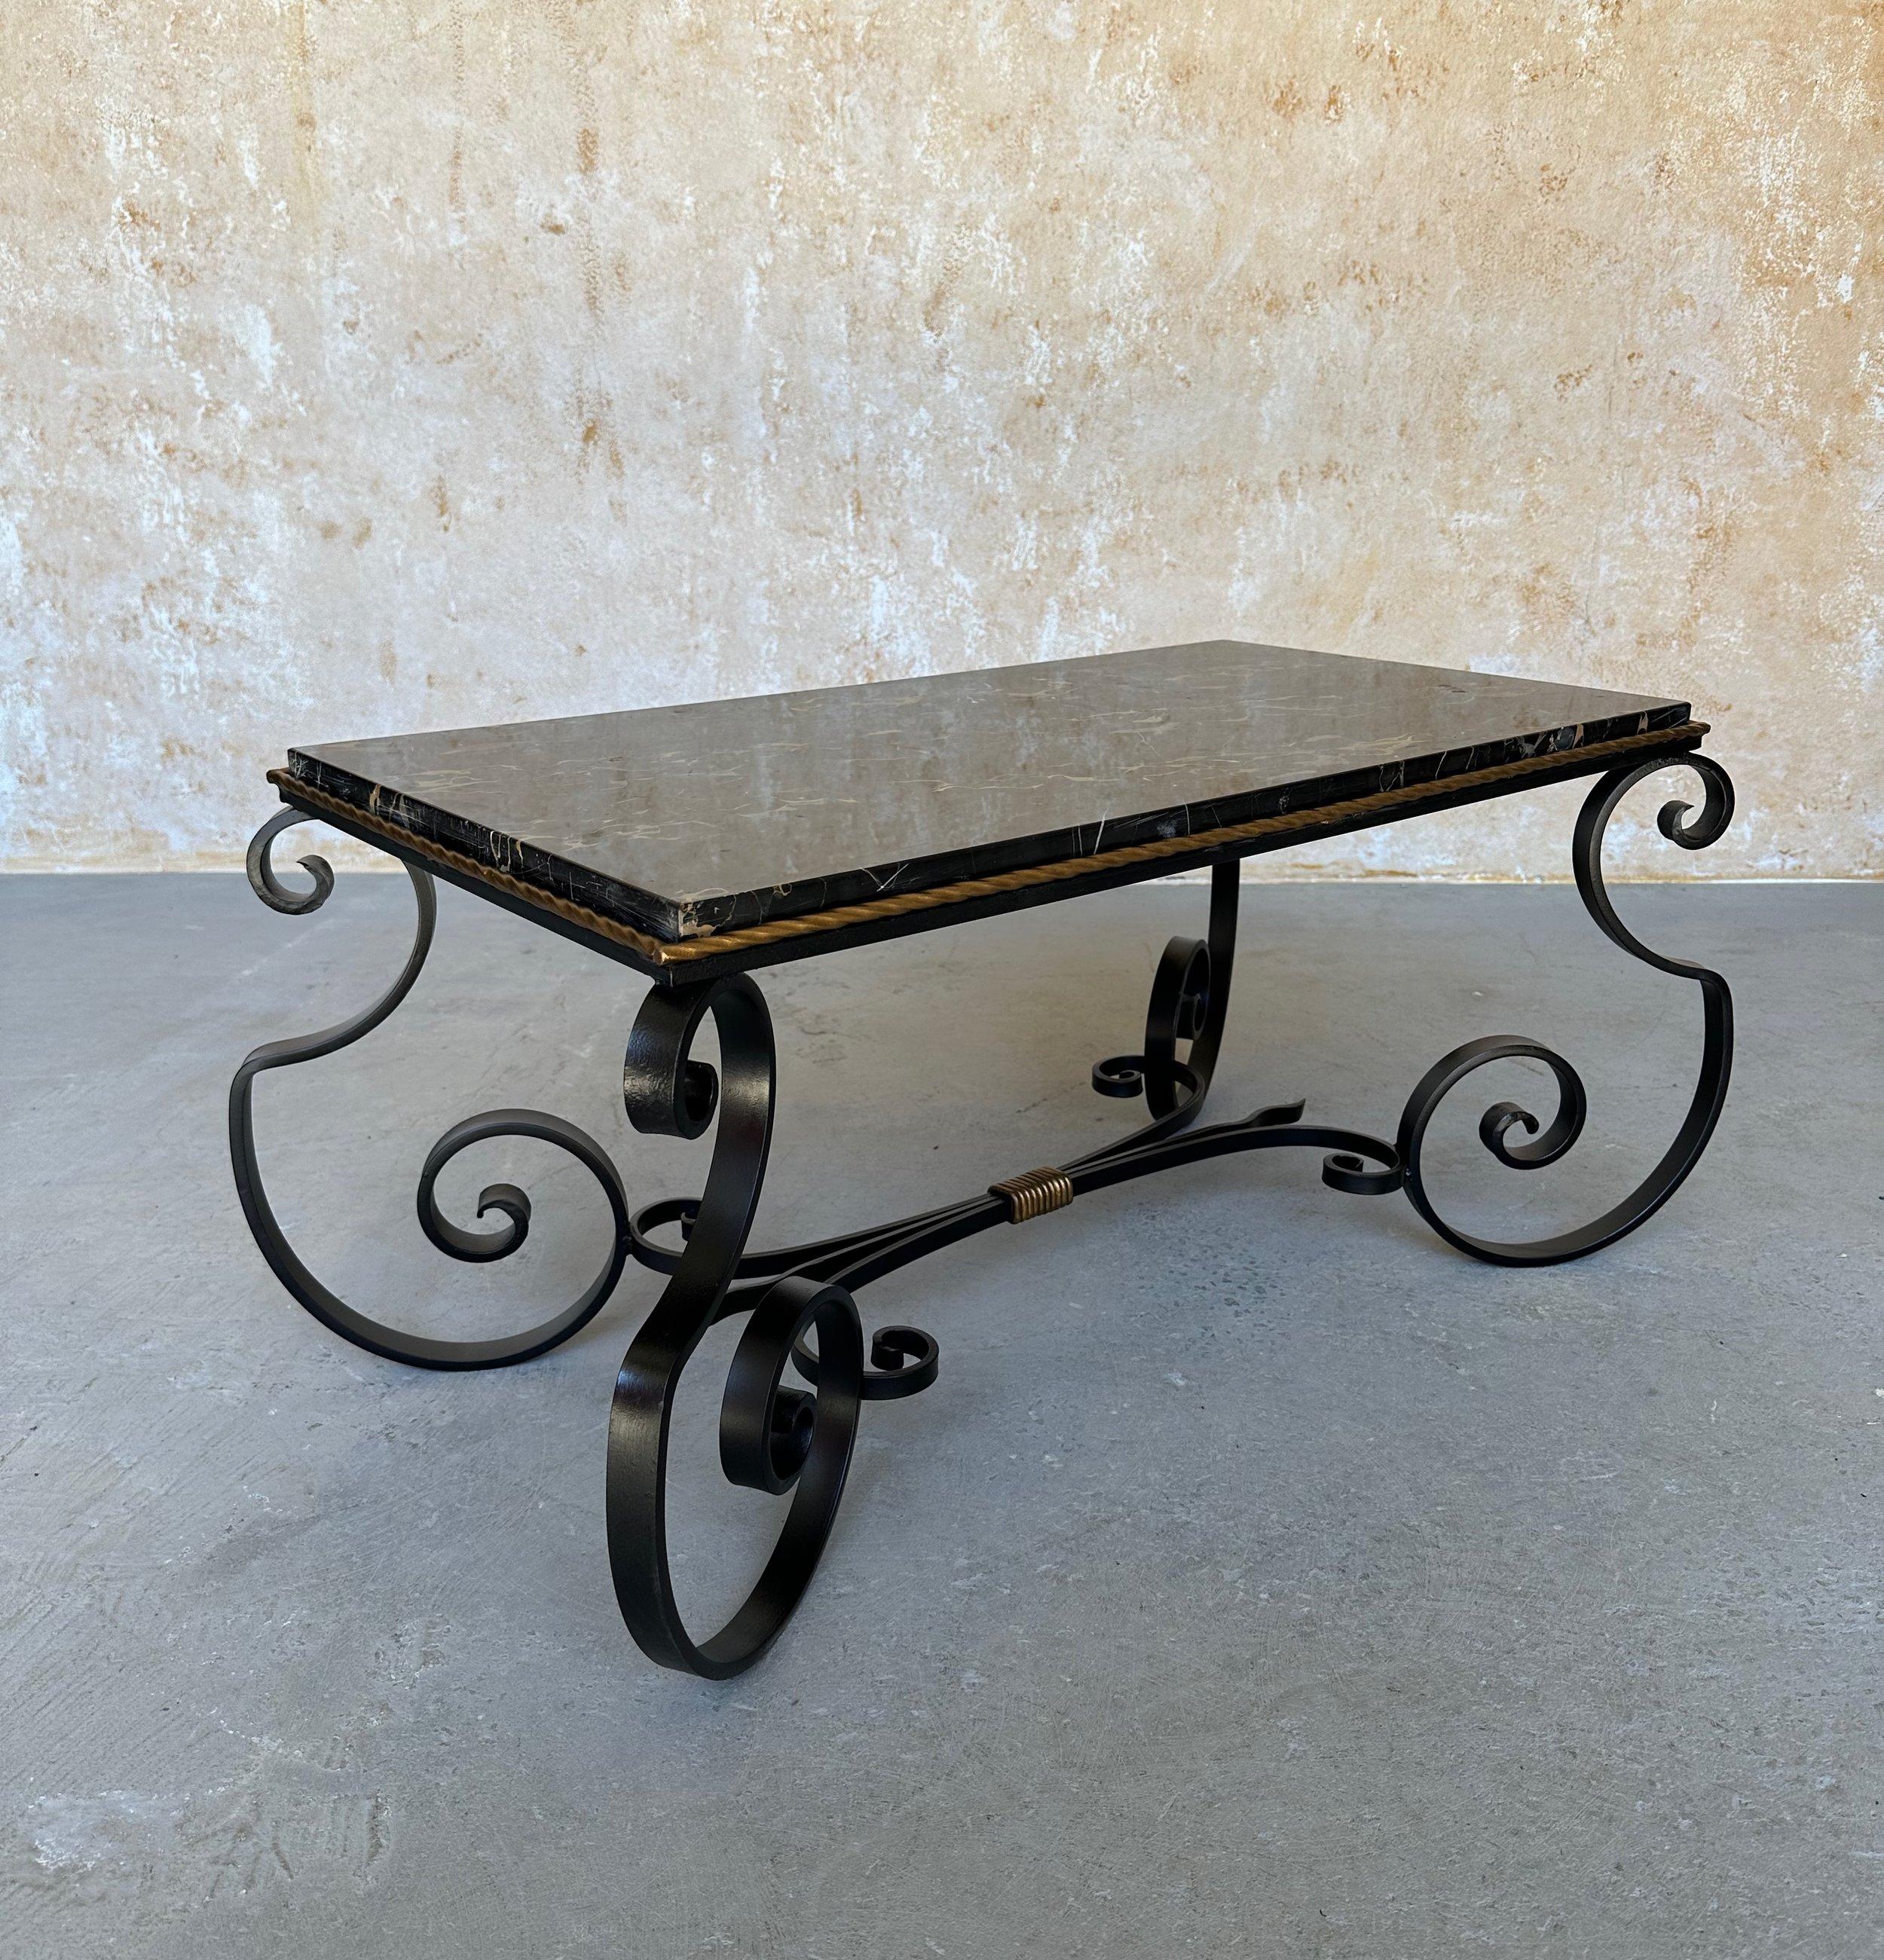 This elegant French coffee table features an ornate black frame with dramatic “S” scrolled legs and a horizontal stretcher with a collar that is highlighted in hand-applied gold. This style is typical of 1940s-50s French design. The original marble